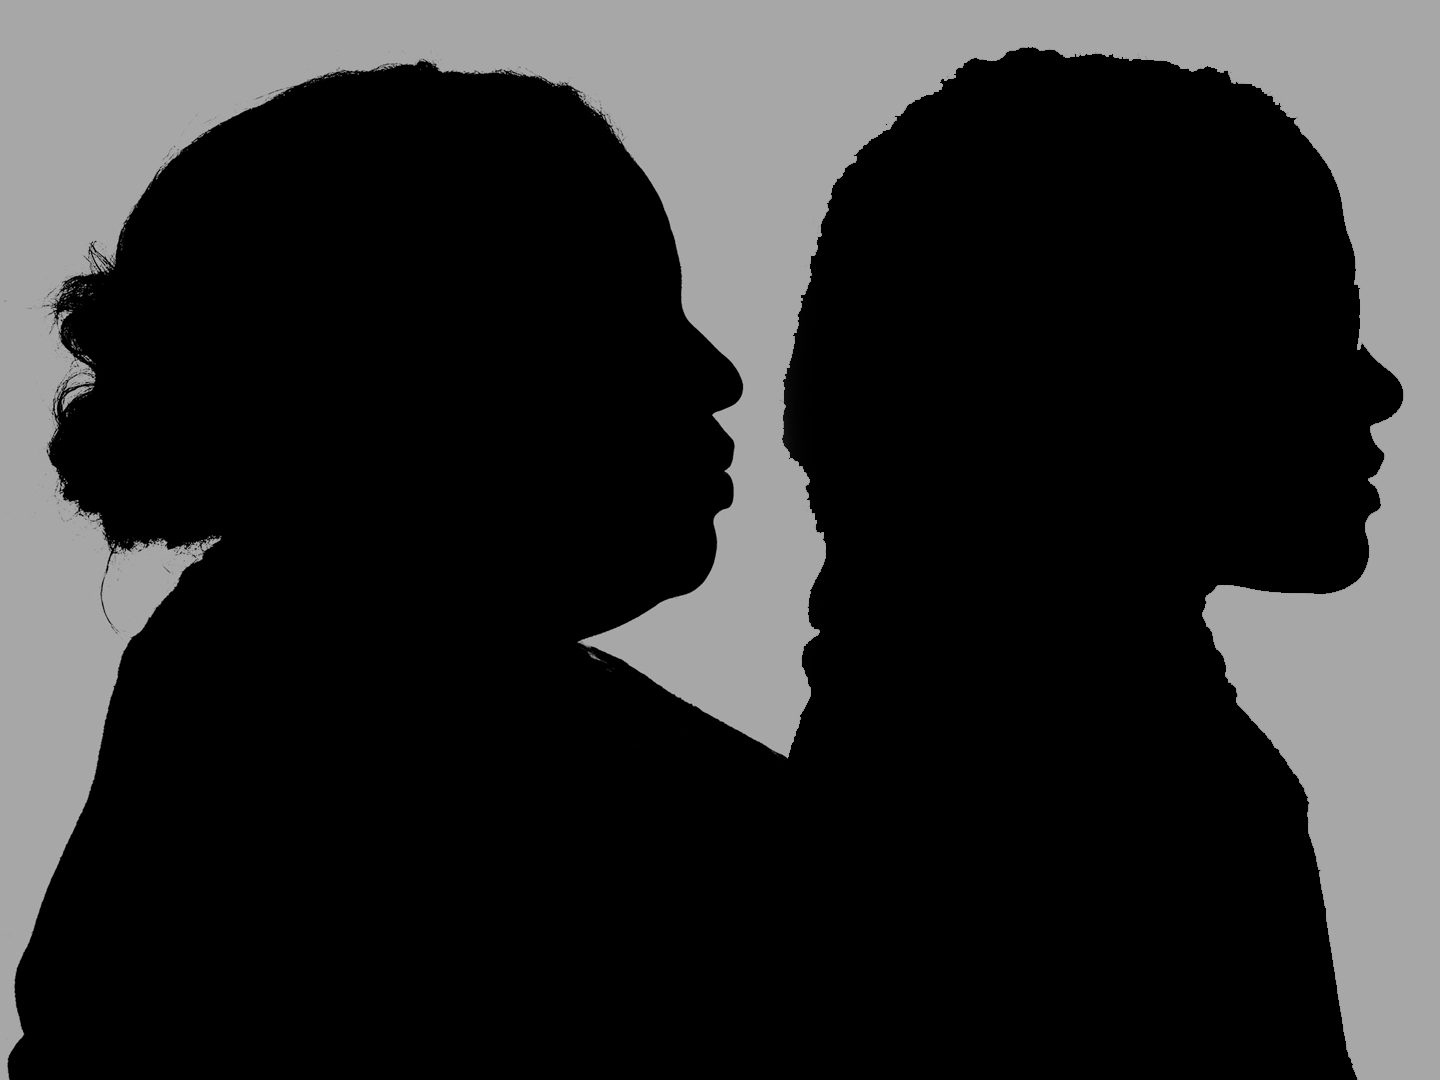 Silhouette of two Black women against a gray background.